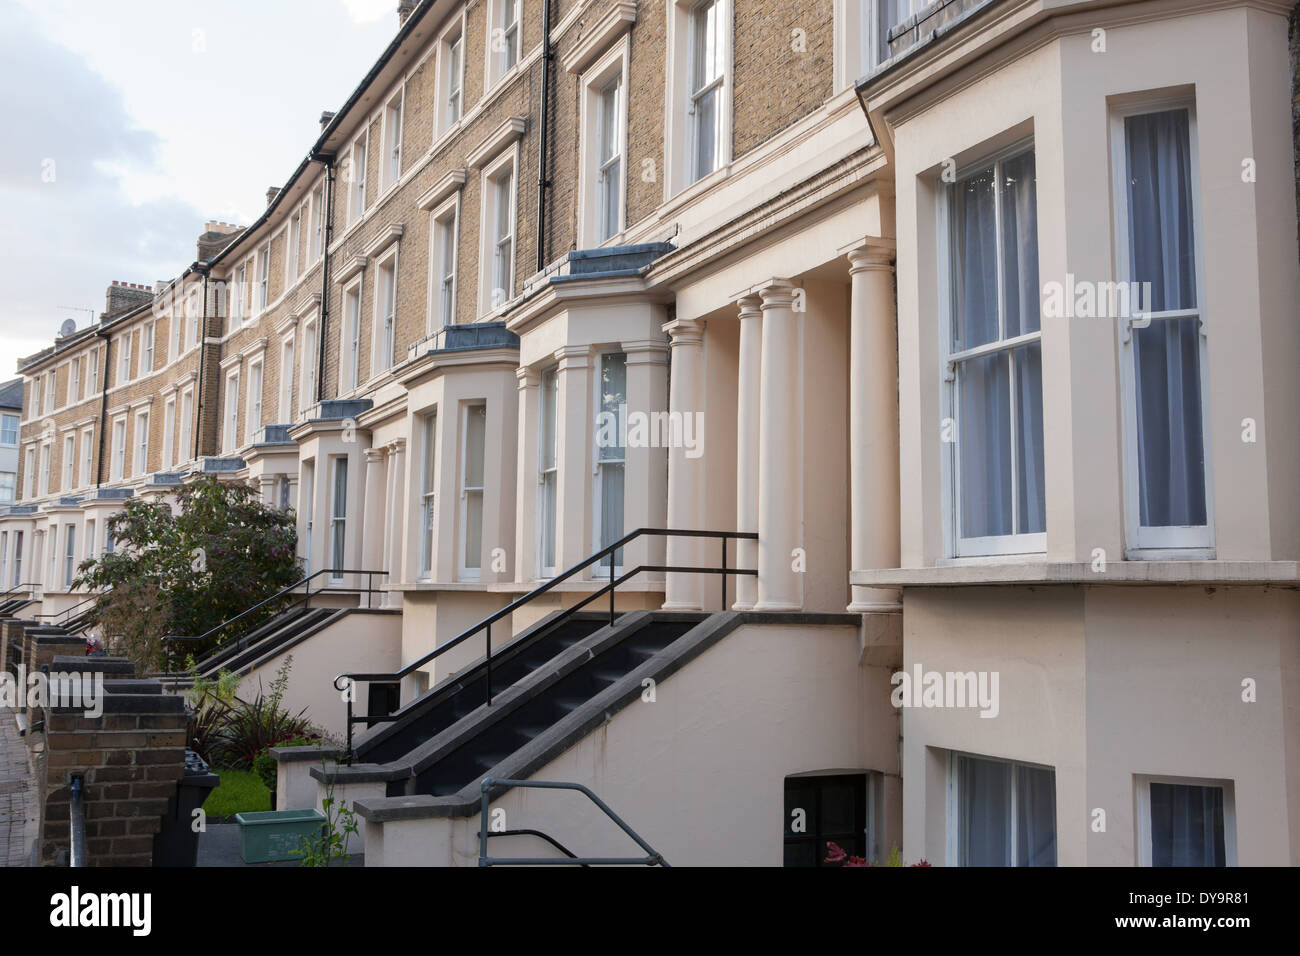 A row of Victorian Houses in London Stock Photo